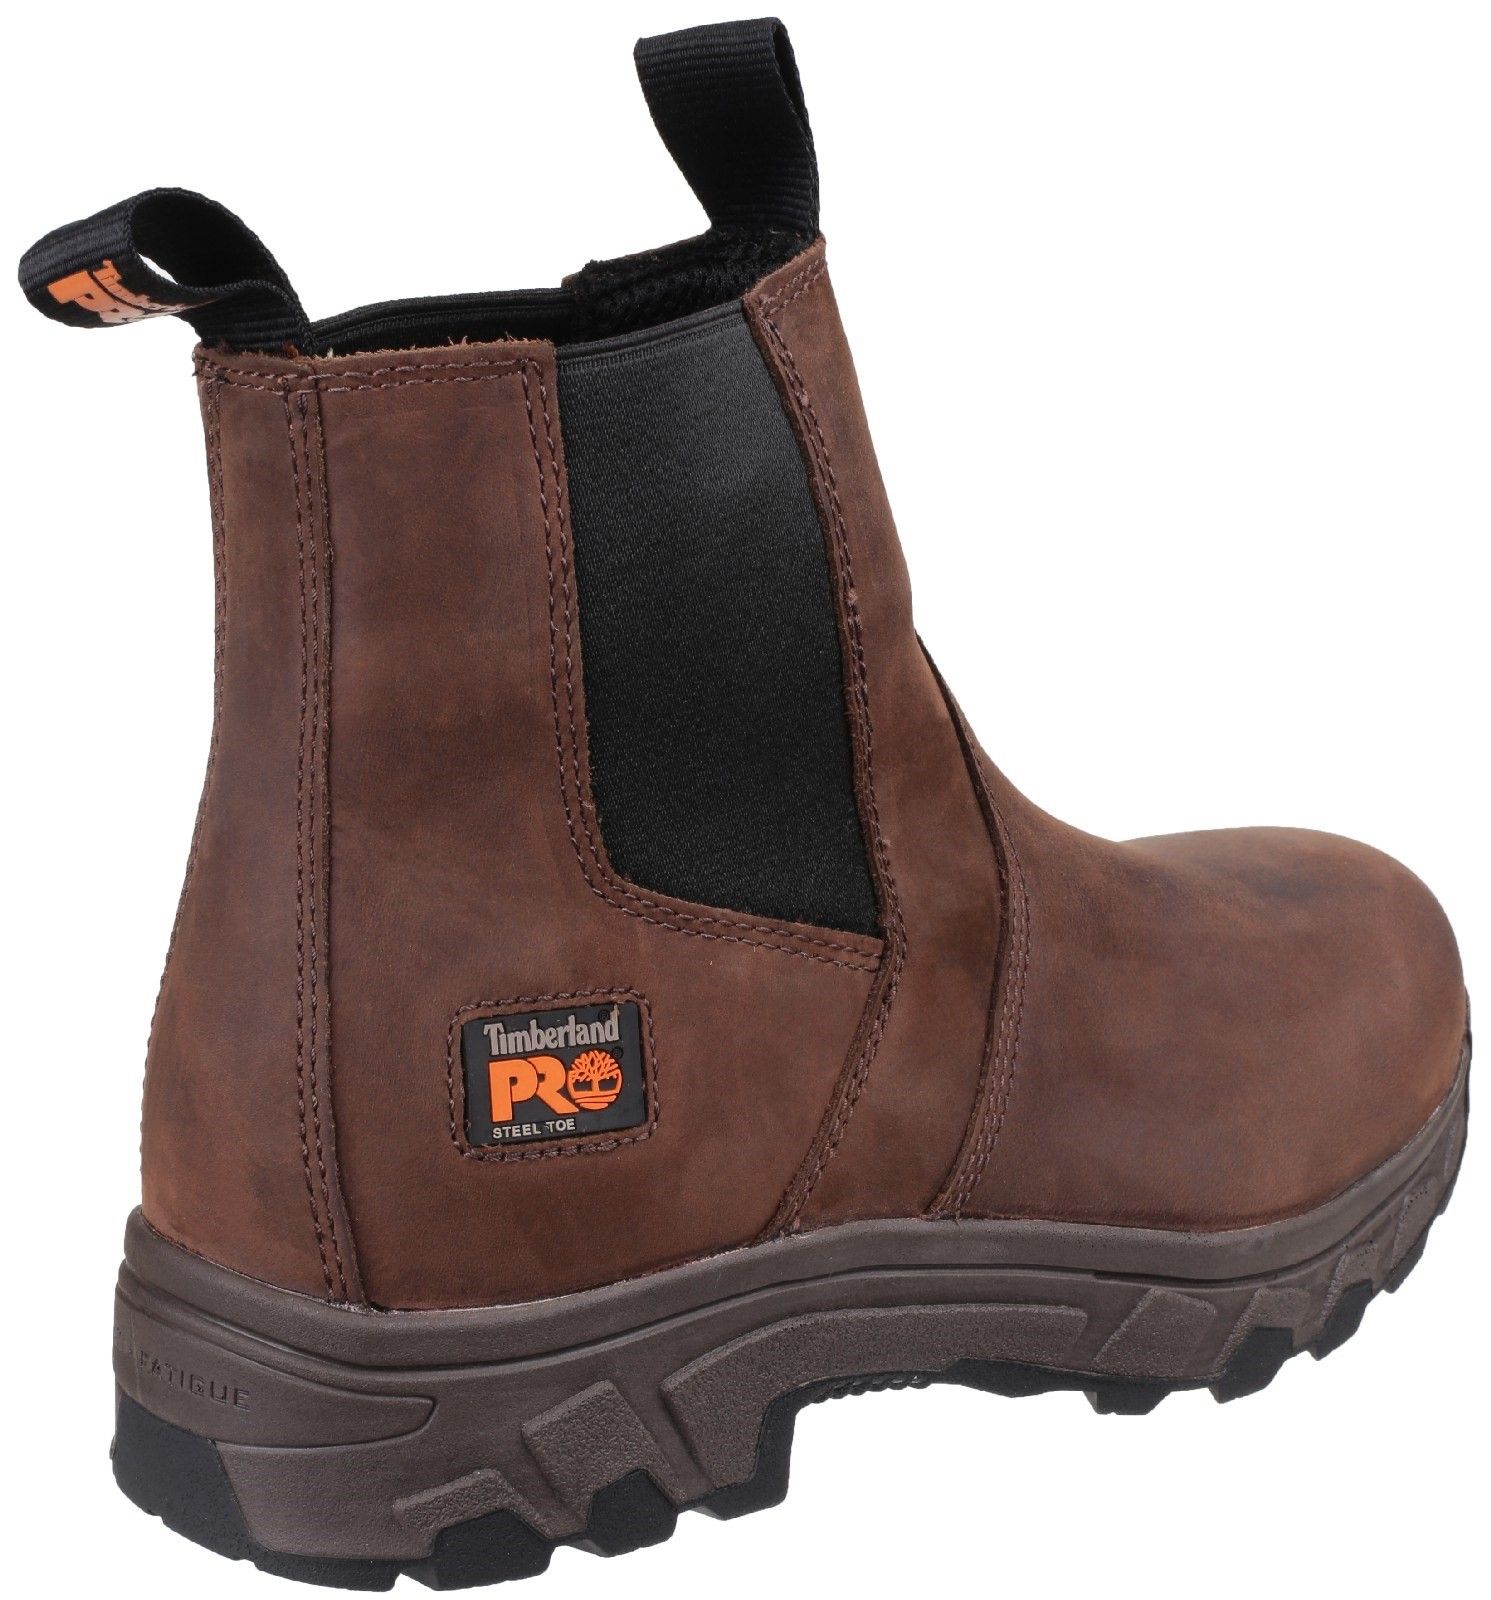 MADE TO WORK: The Timberland PRO Workstead collection features premium, waterproof leather, dual-purpose hardware and Anti-Fatigue Technology, giving it the style and protection you need to feel comfortable and protected all day long.Timberland PRO Workstead Dealer Slip On boot with impact and compression resistant toe cap. 
Anti-static with an energy absorbing heel. 
Water resistant upper. 
Cement construction for flexibility and reduced break-in time. 
Water resistant premium leather upper.